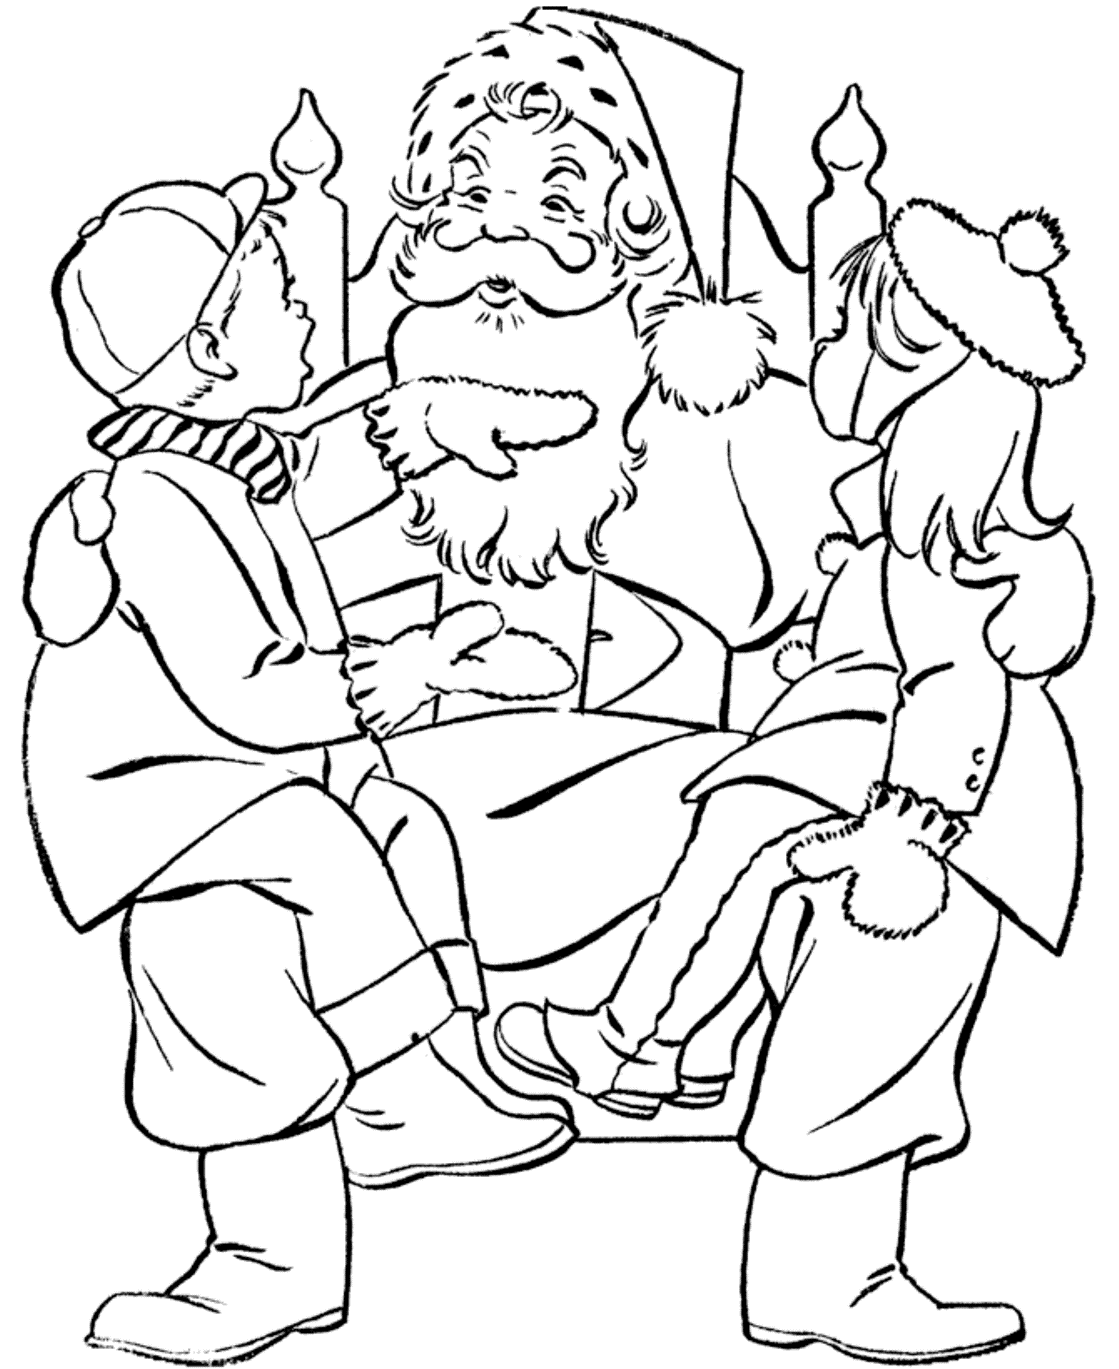 santa claus coloring pages with kids Coloring4free